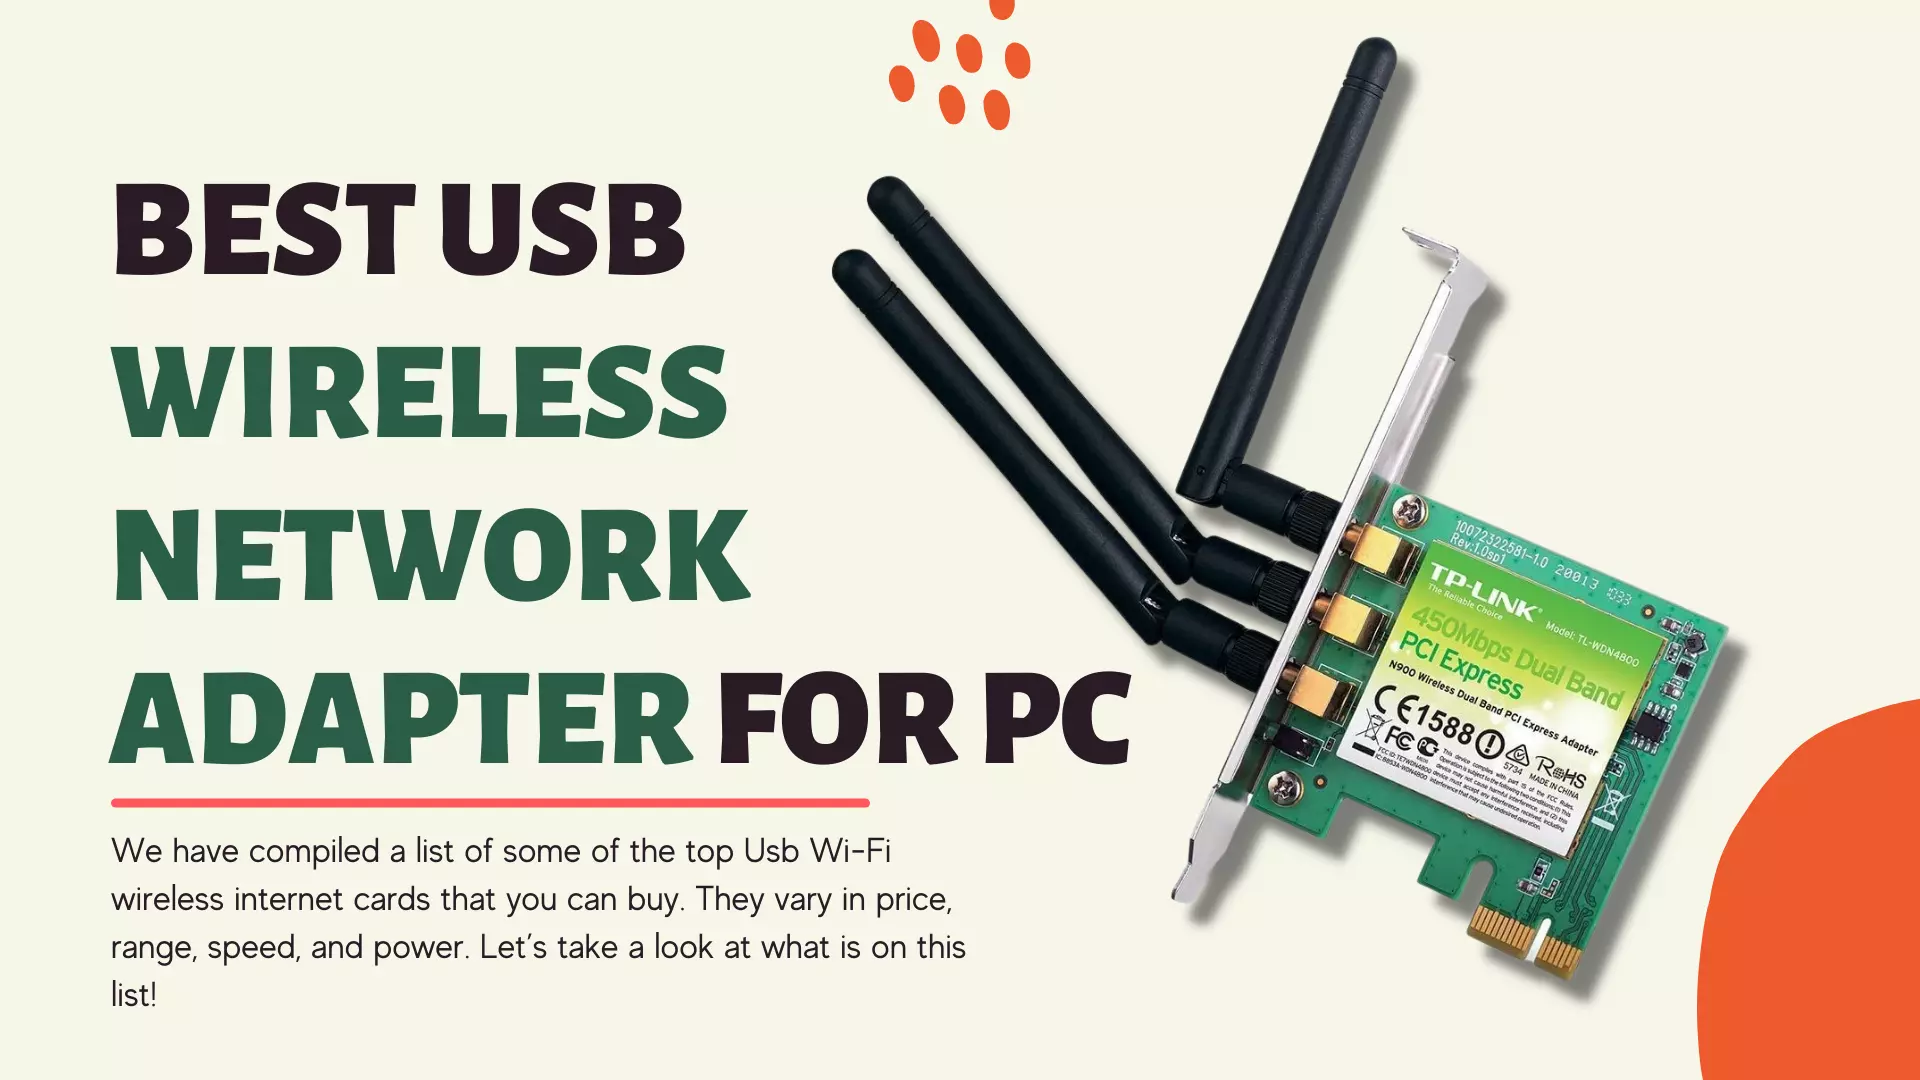 Best USB Wireless Network Adapter for PC